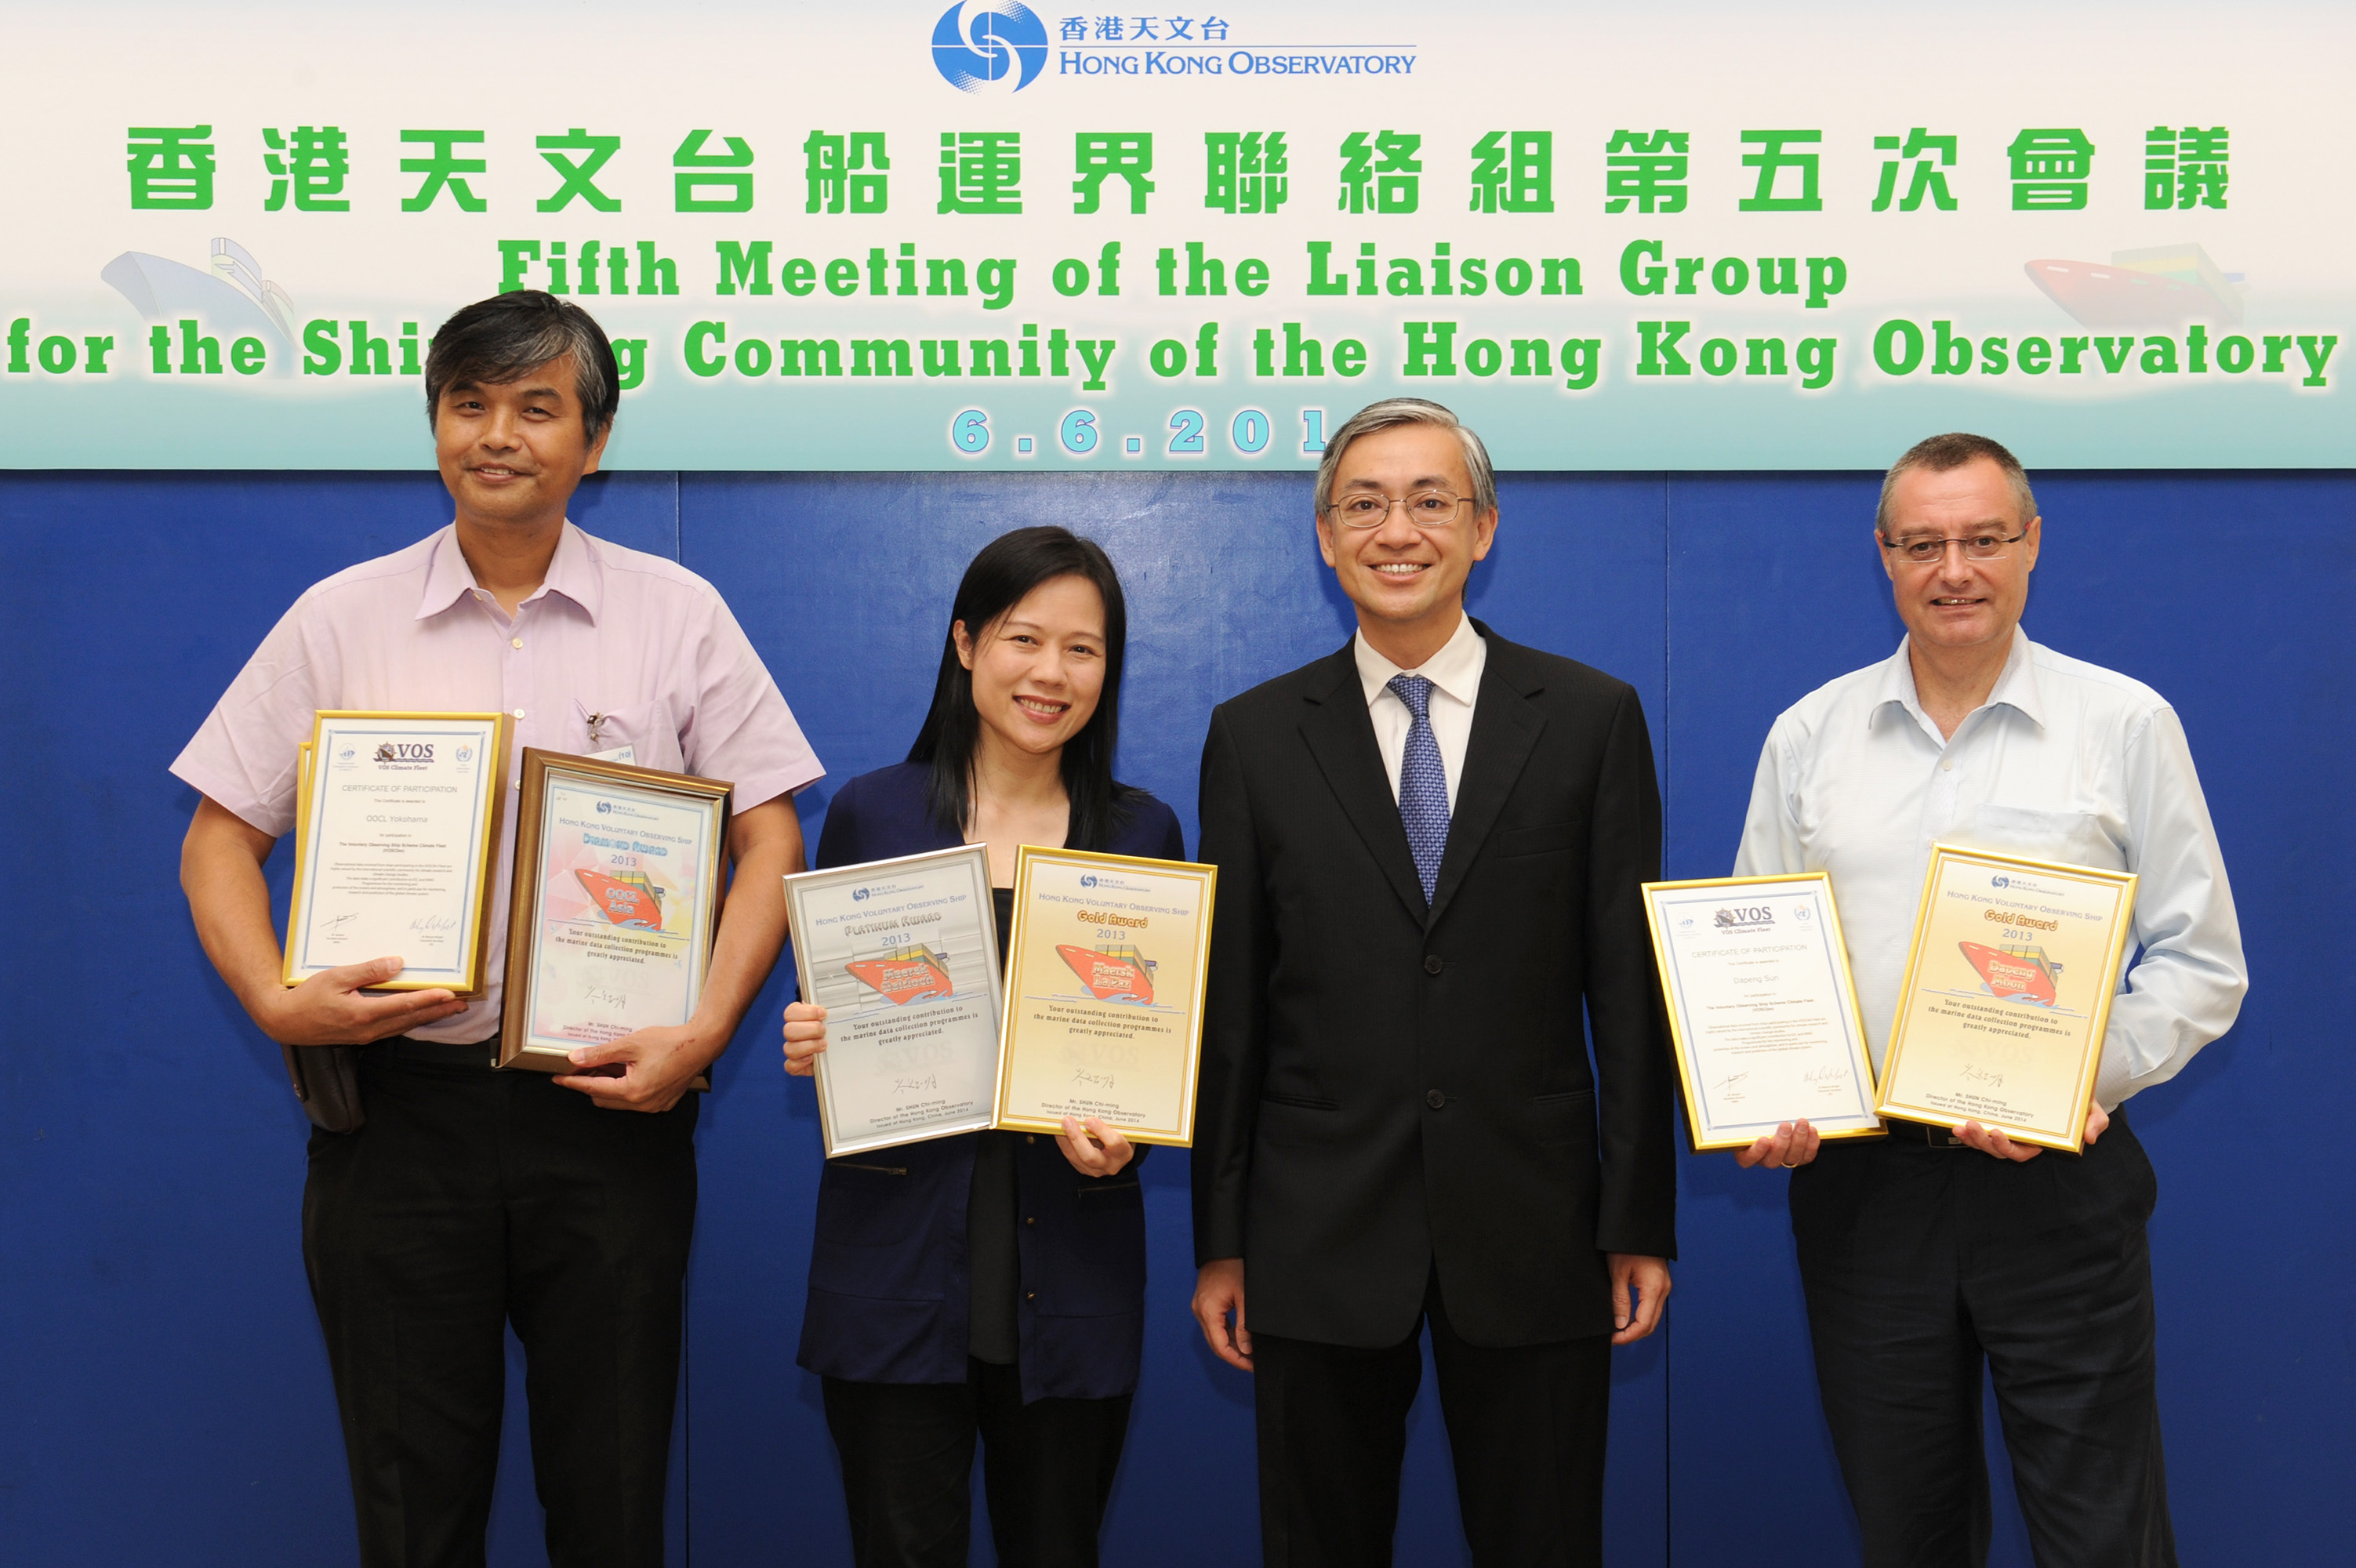 Mr Shun (second from the right) presenting awards and certificates to outstanding Hong Kong voluntary observing ships